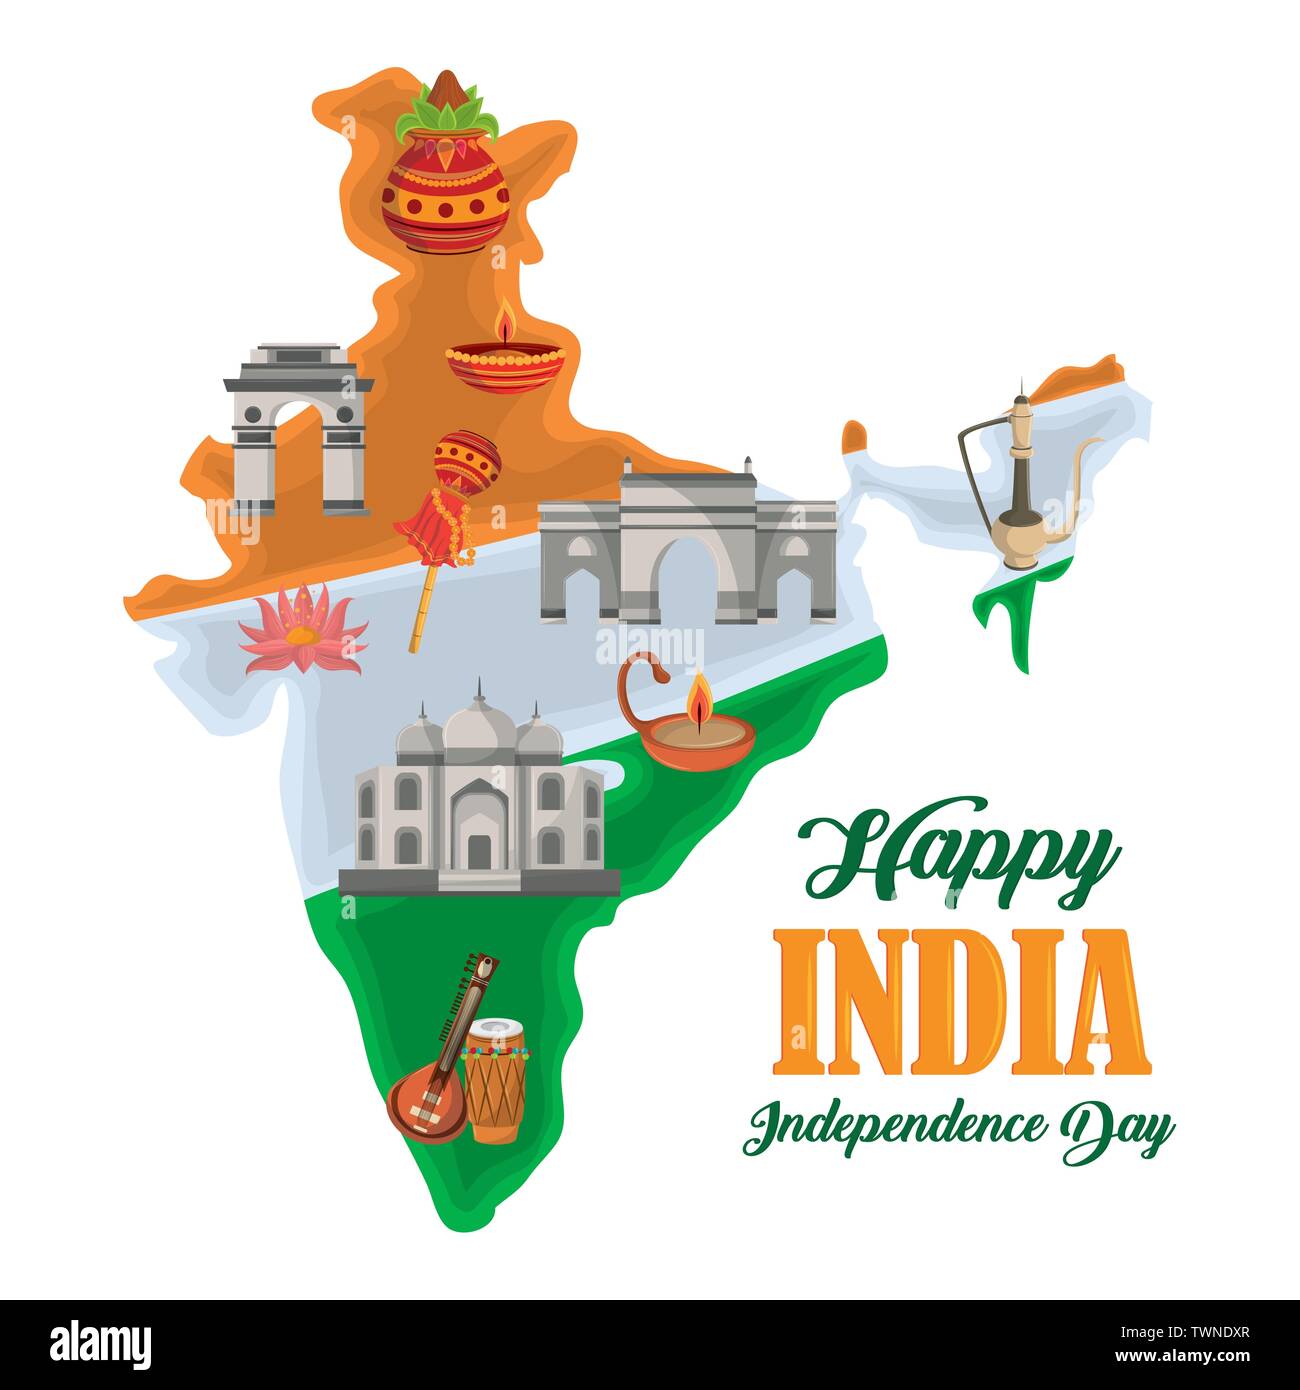 Happy india independence day card Stock Vector